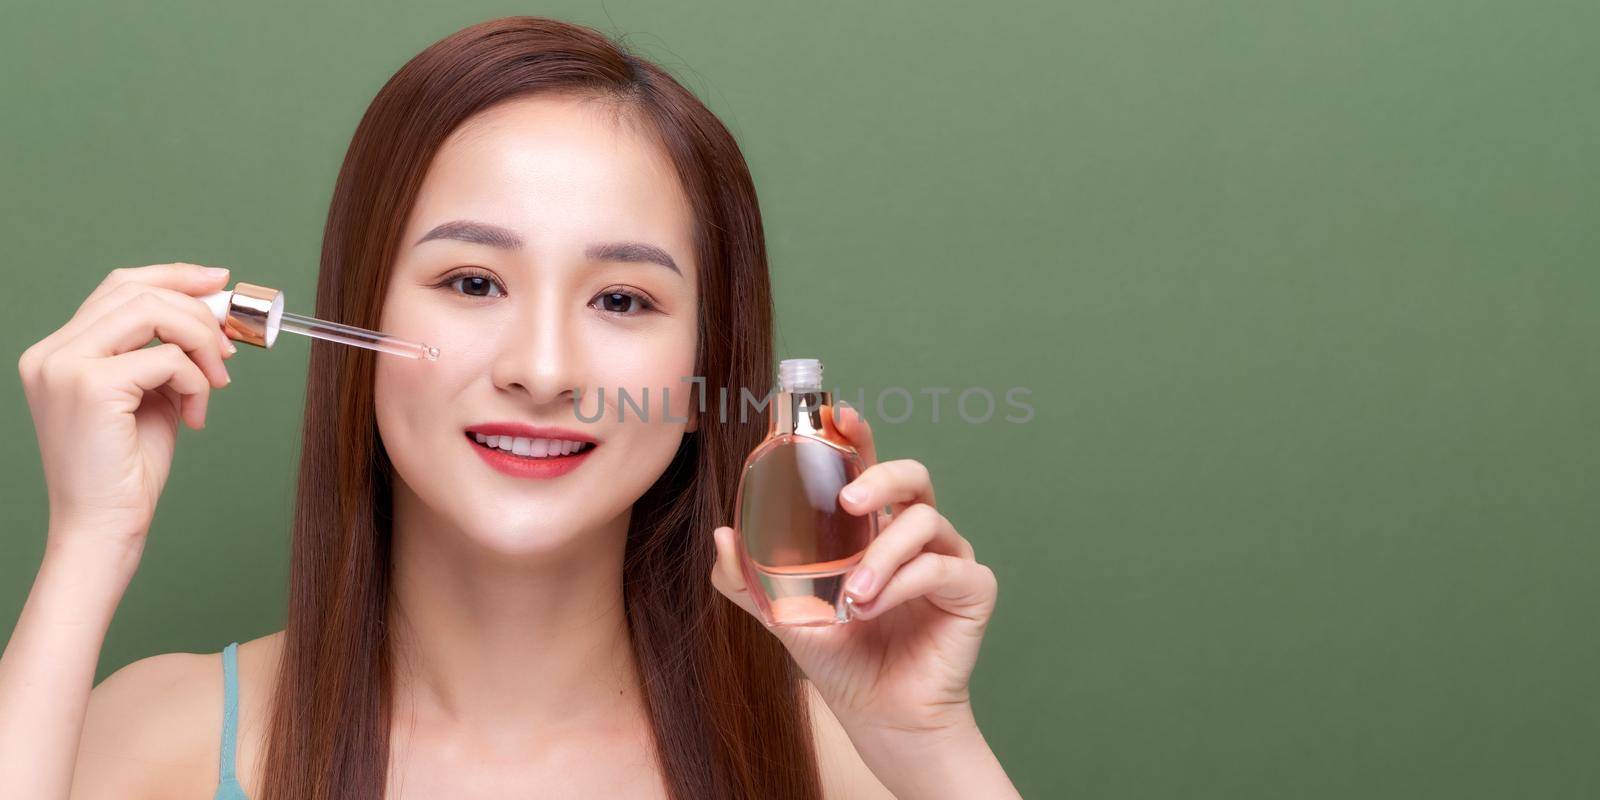 Smiling woman holding vitamin c serum near her face on green background